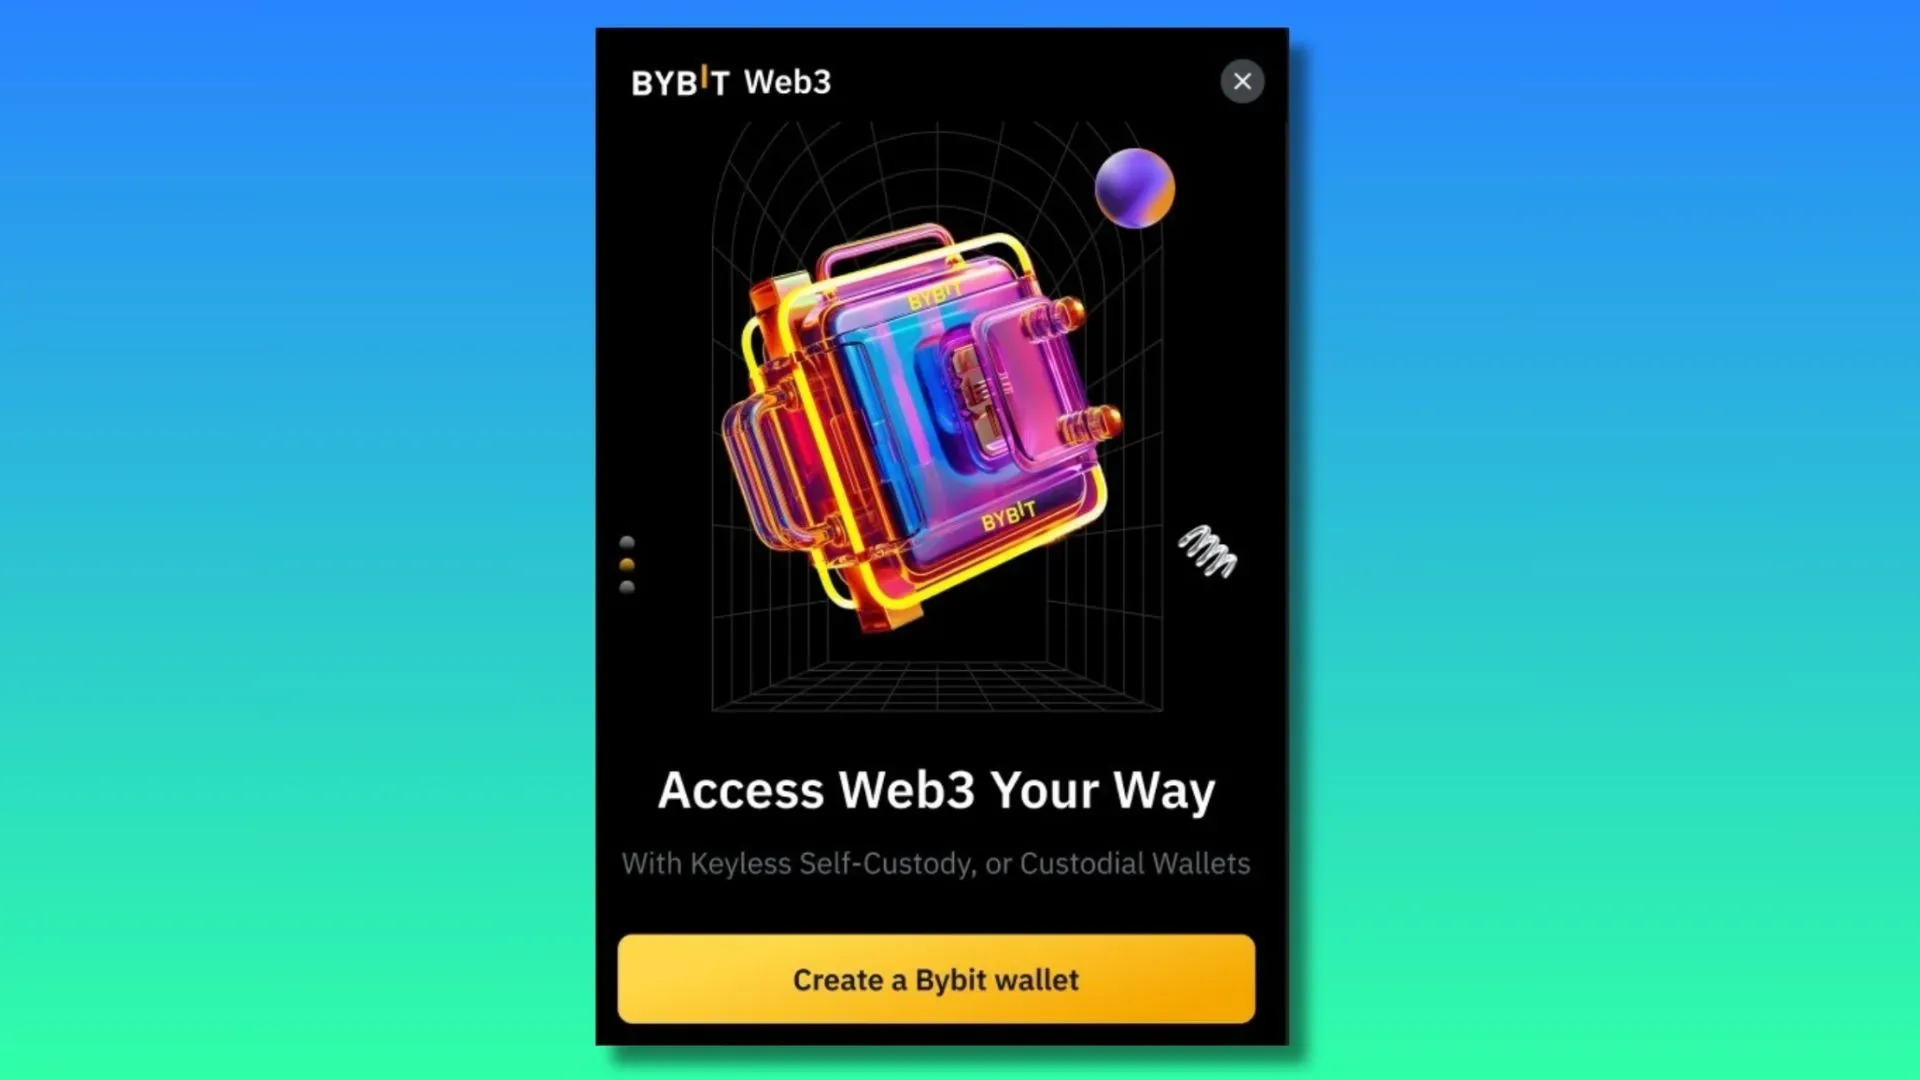 Bybit Web3 Hits 1M Users, Launches Keyless Wallet